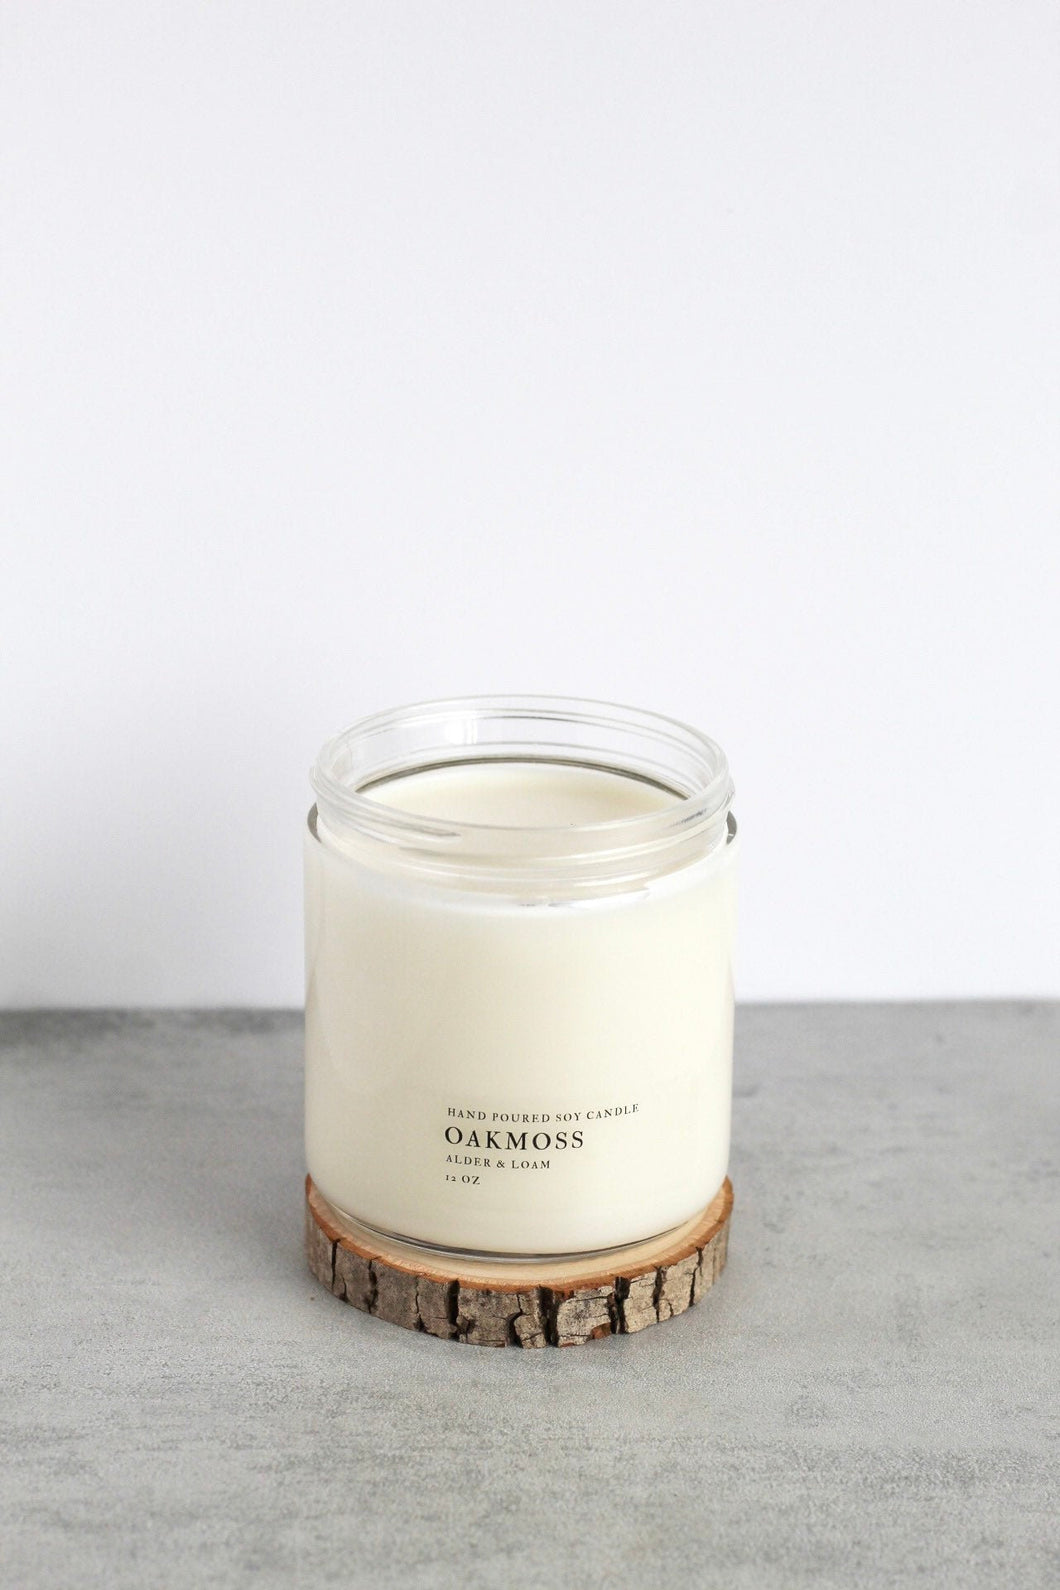 Oakmoss Double Wick Soy Candle, Hand Poured, Natural, Eco Friendly, Earthy Scent, 12 oz Jar